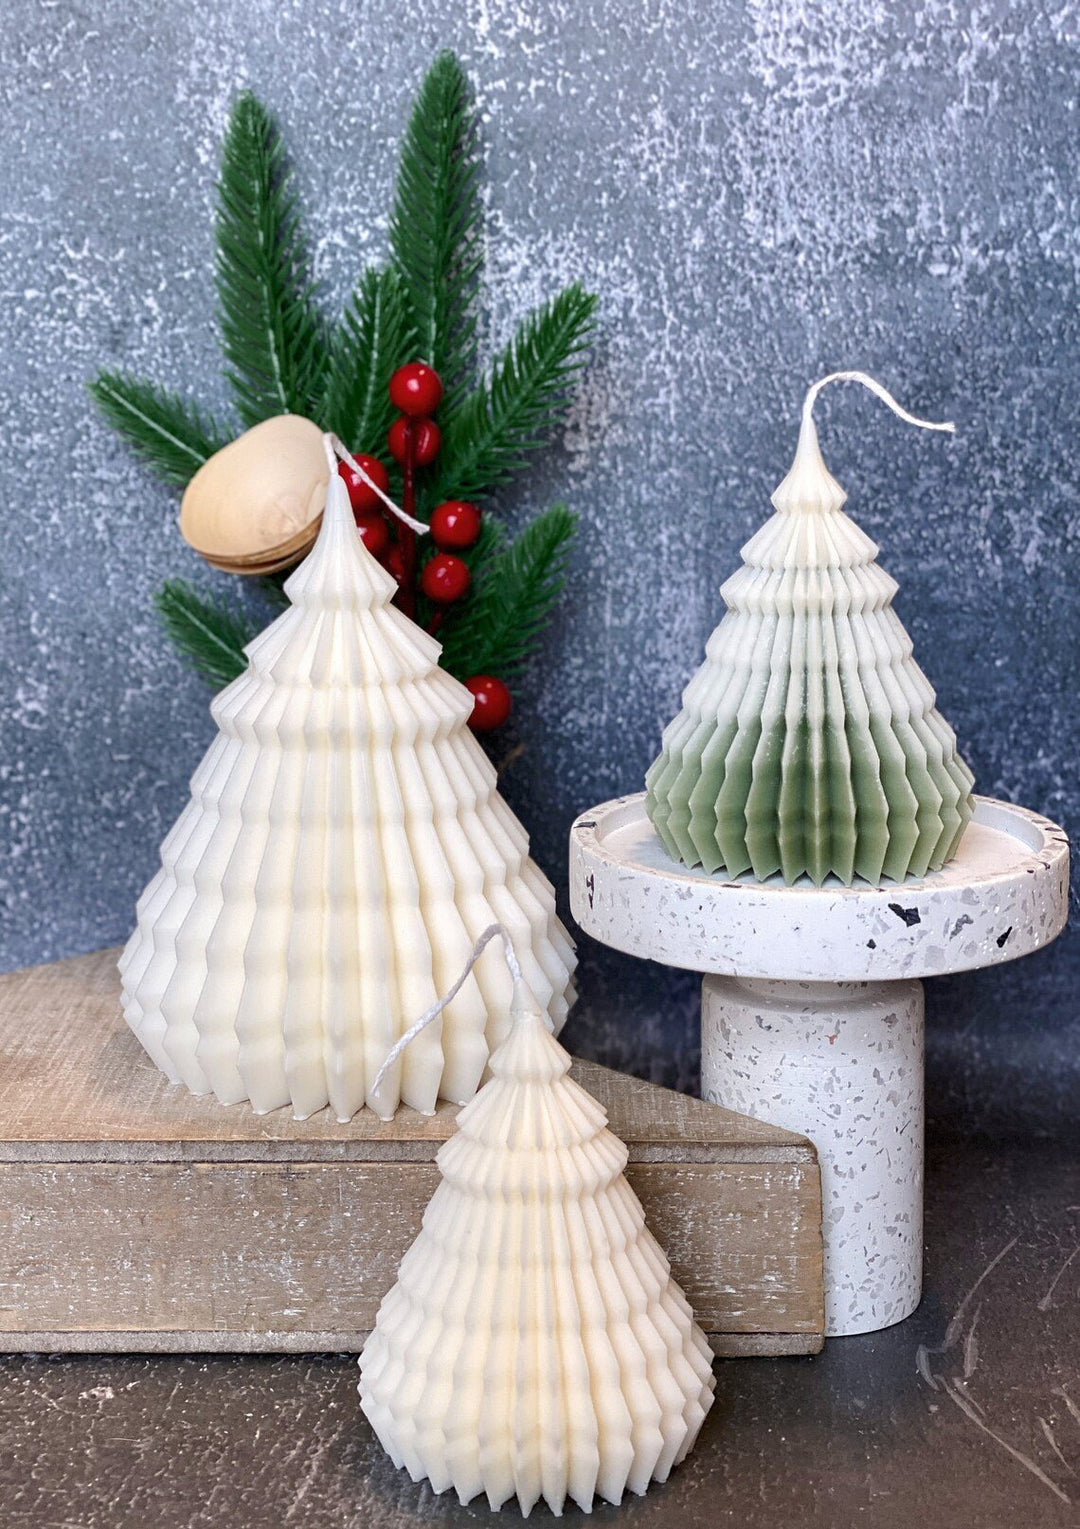 Origami Christmas Tree Candles | Holiday Decor - Crazy About Candles